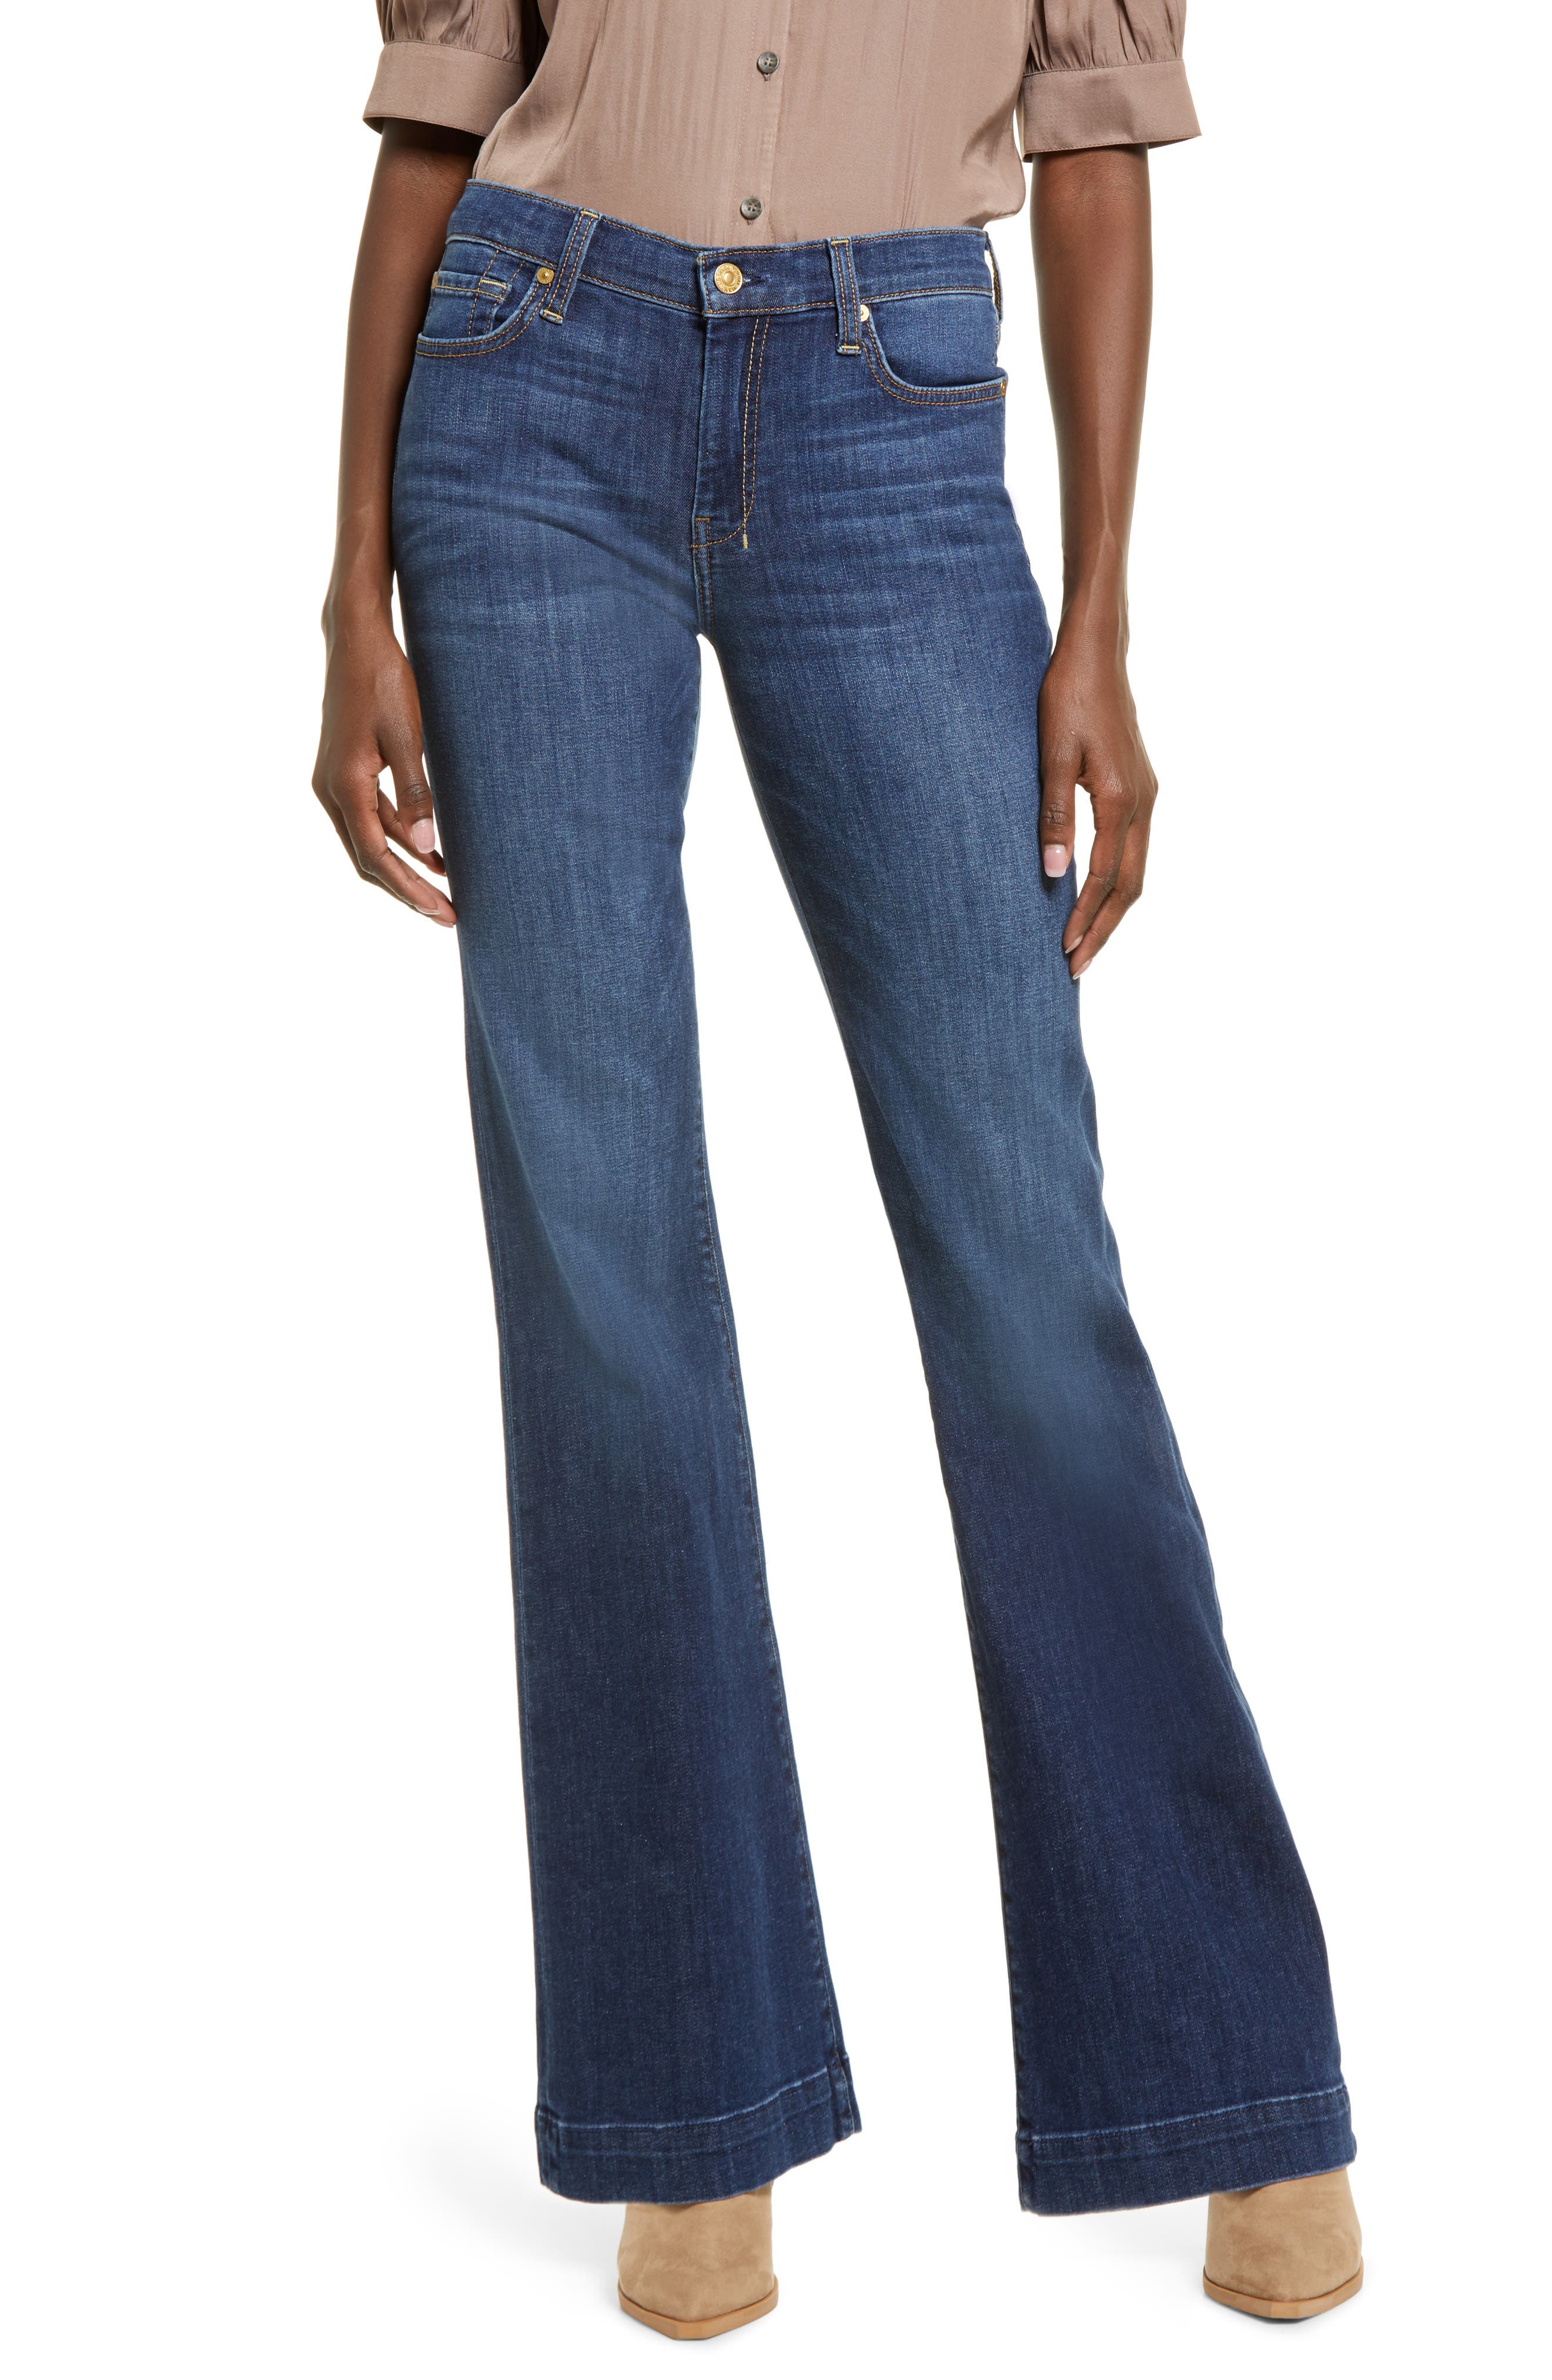 blau T 38-40 Straight-Cut Jeans 7 FOR ALL MANKIND W29 Straight-Cut Jeans  7 For All Mankind Damen Damen Kleidung 7 For All Mankind Damen Jeans 7 For All Mankind Damen Straight-Cut Jeans  7 For All Mankind Damen 